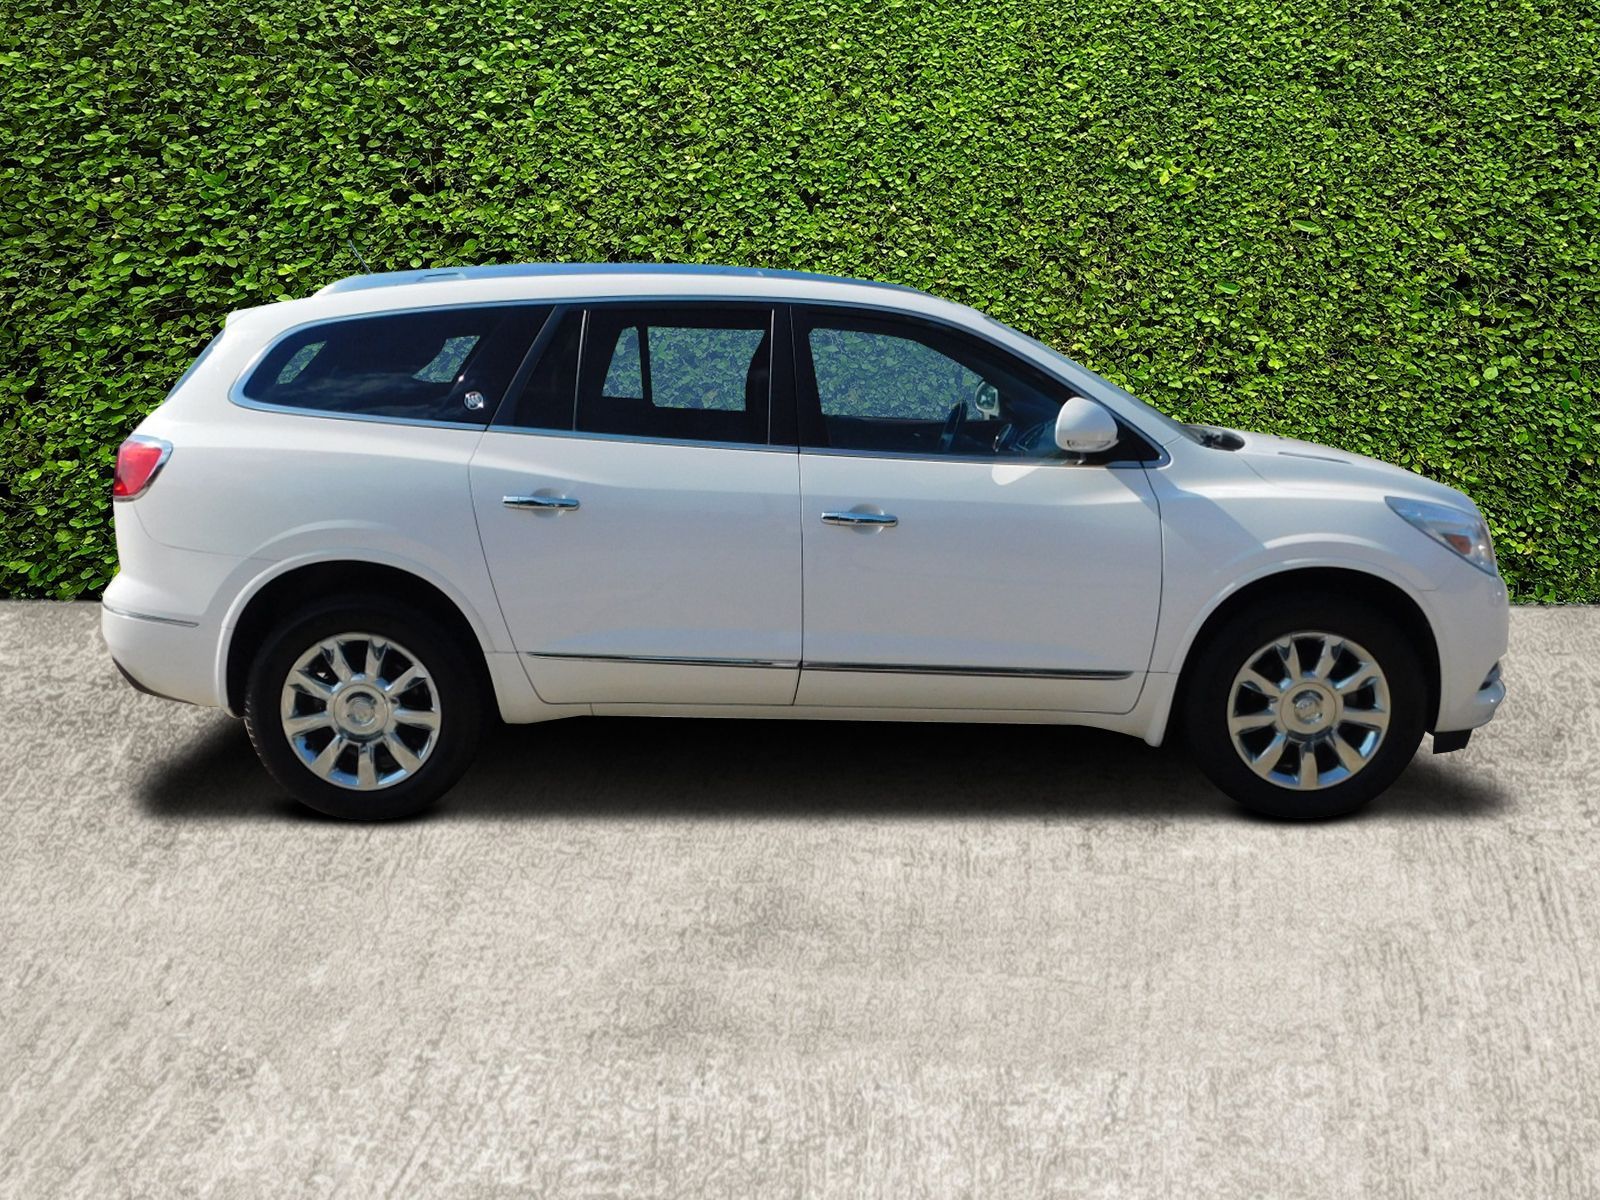 Used 2014 Buick Enclave